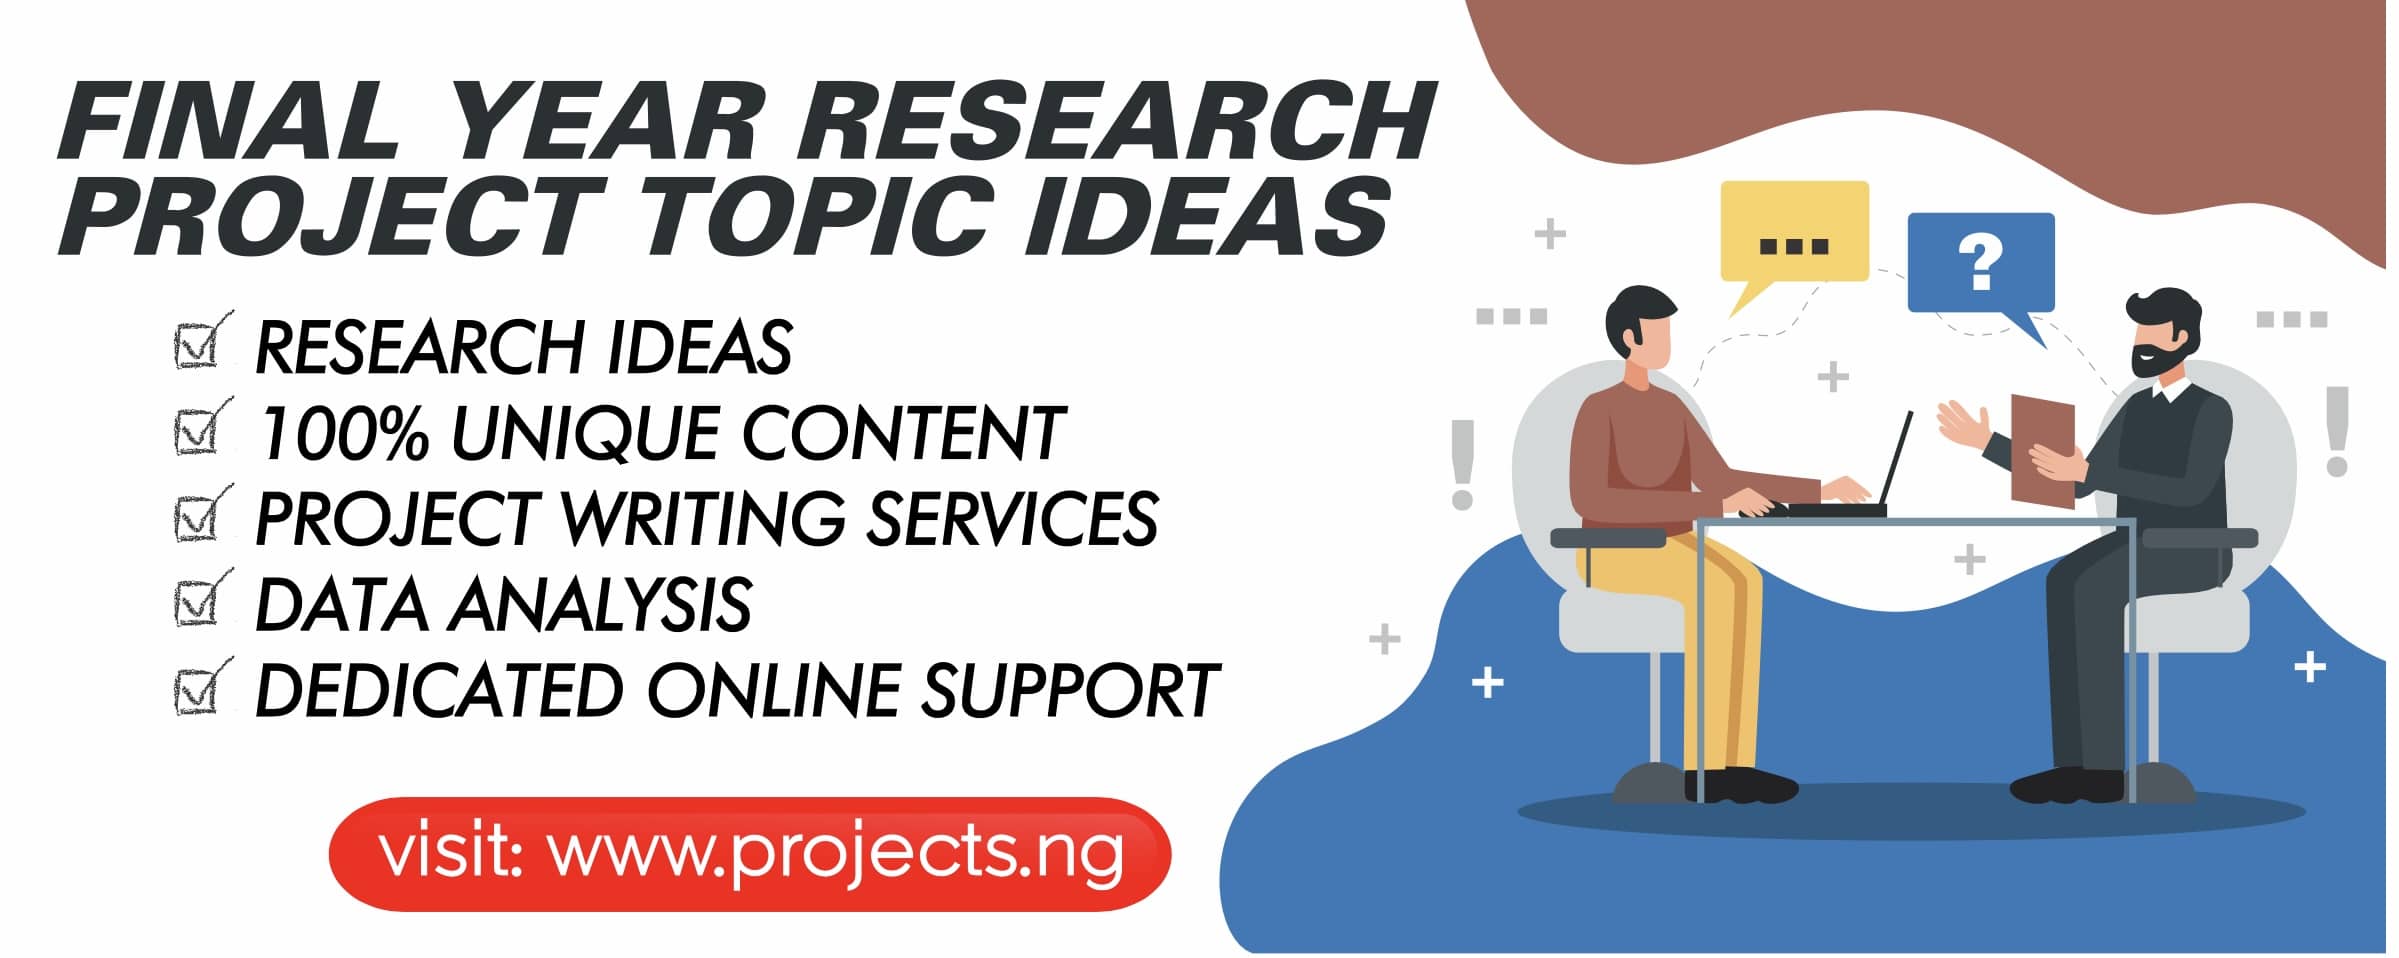 projectsNg, undergraudate research material, final year project topics, postgraduate project topics and research material